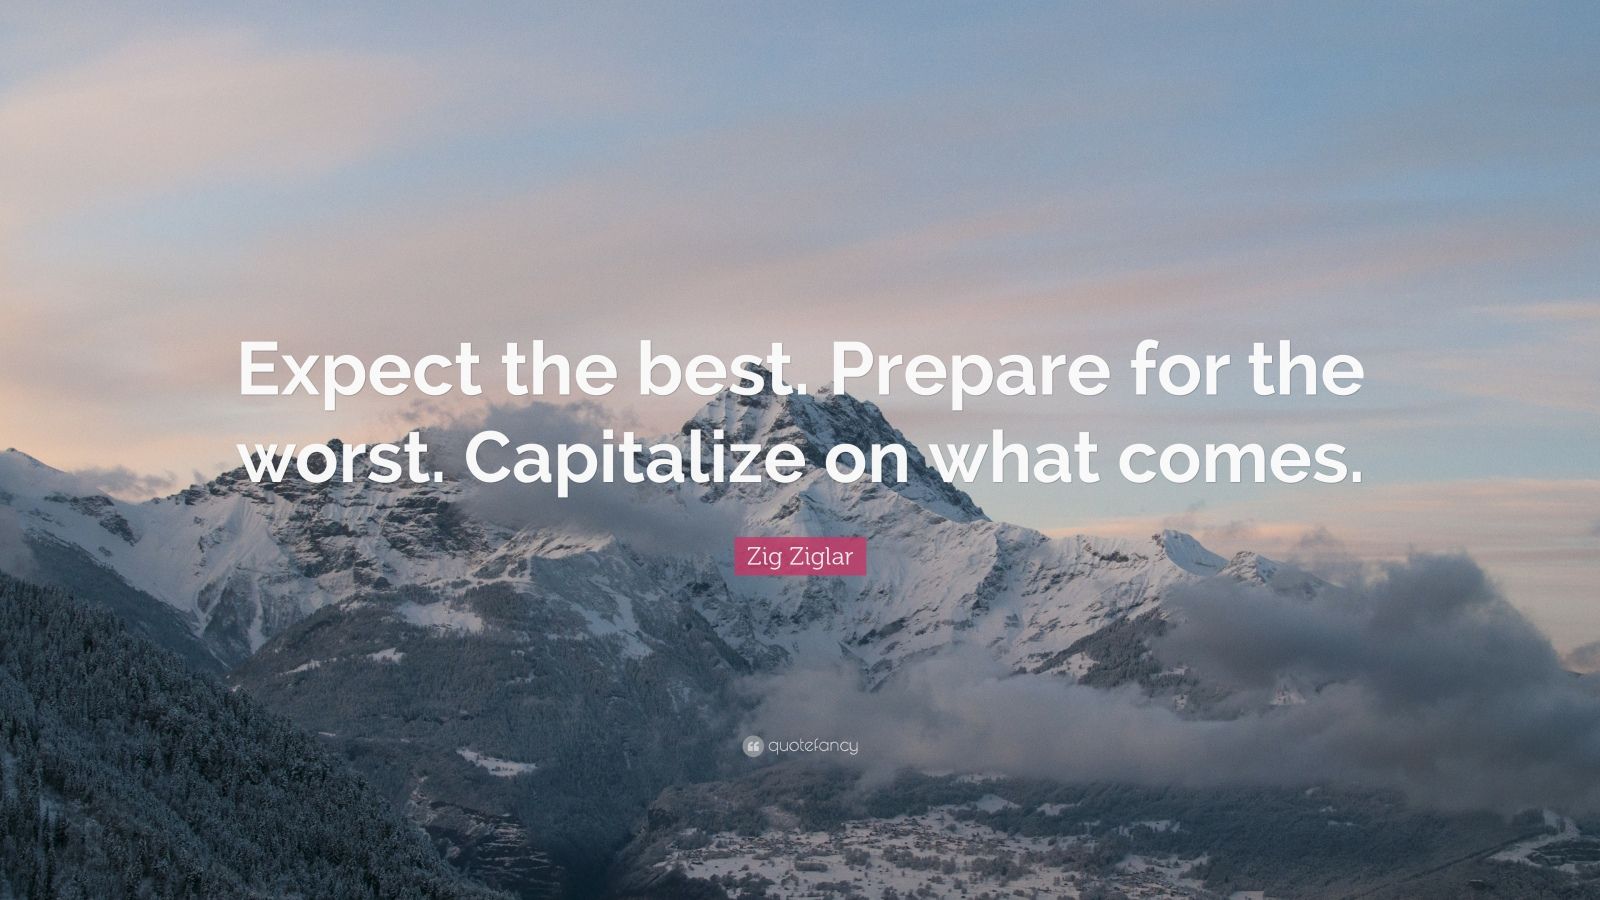 "expect the best. prepare for the worst.